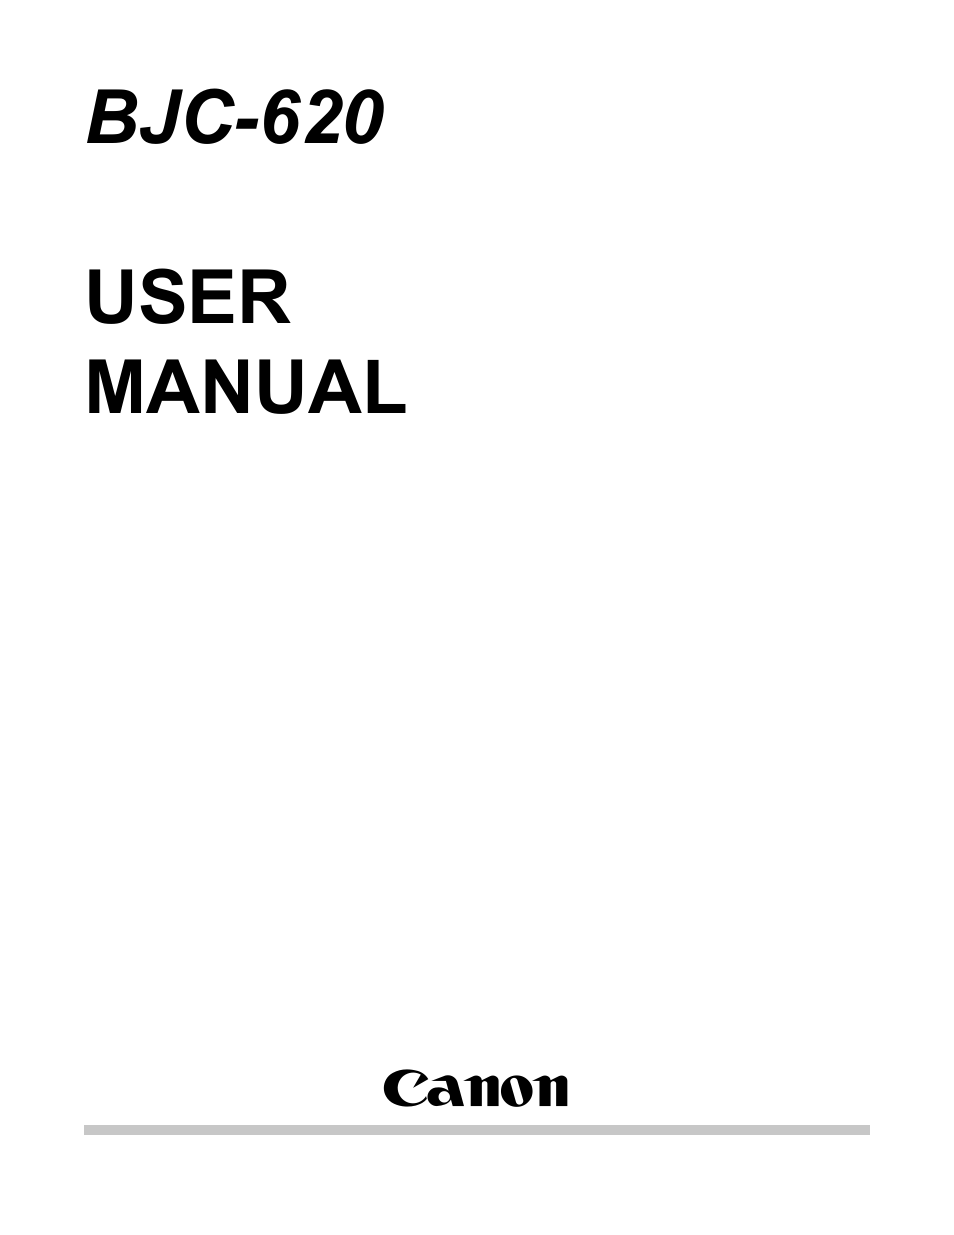 Canon BJC-620 User Manual | 97 pages